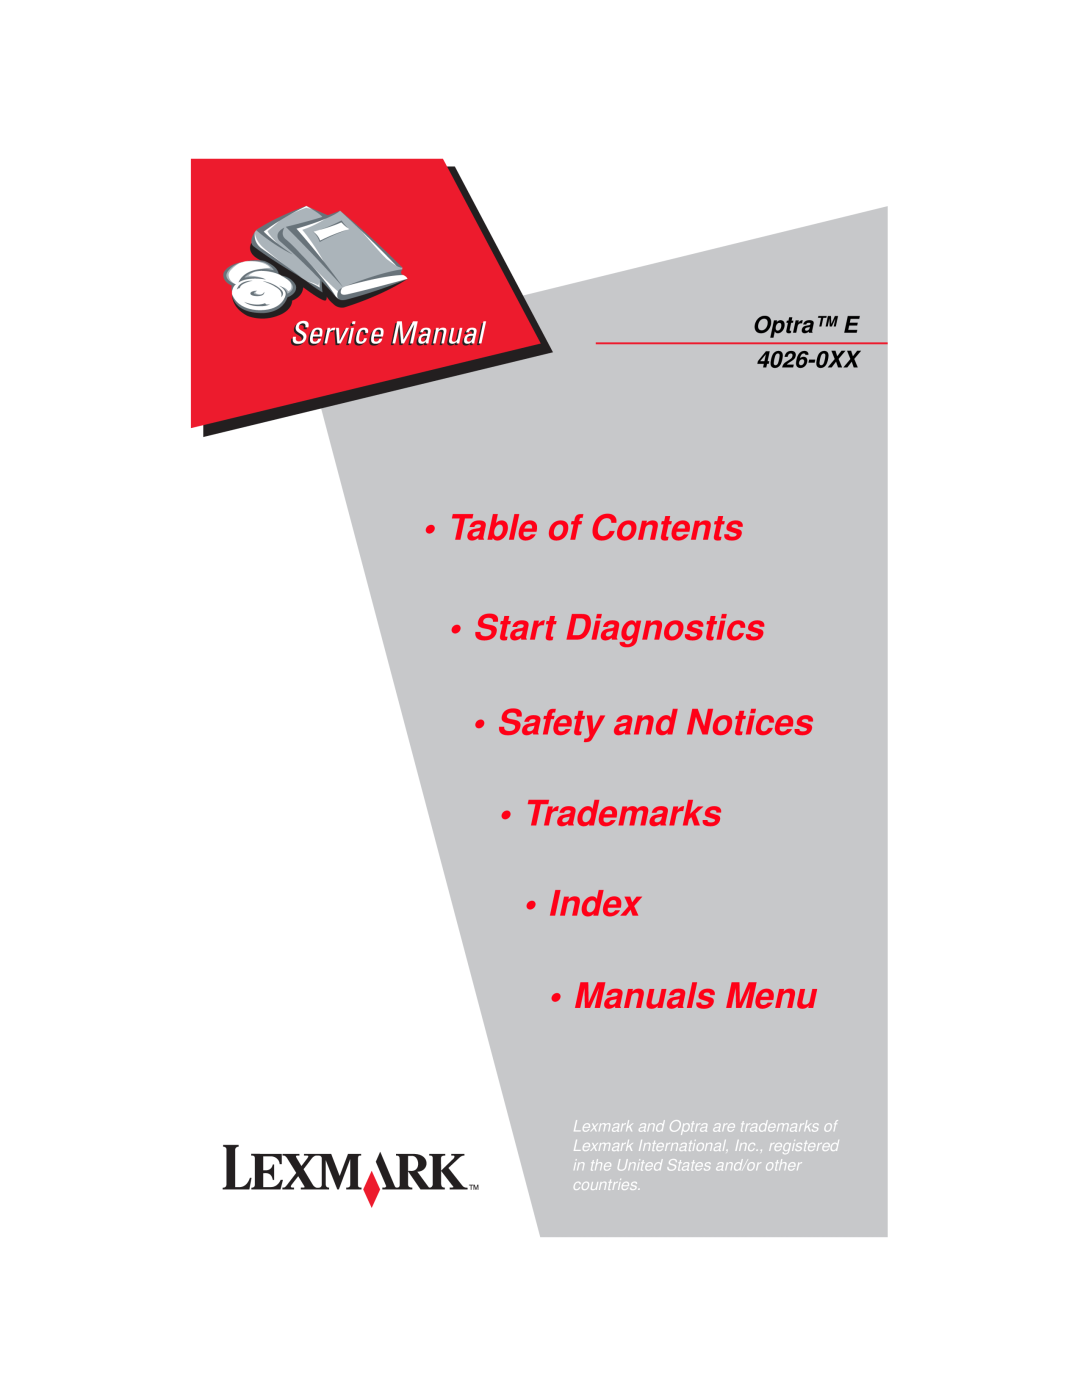 Lexmark 4026-0XX manual •Table of Contents •Start Diagnostics, •Safety and Notices •Trademarks •Index, •Manuals Menu 